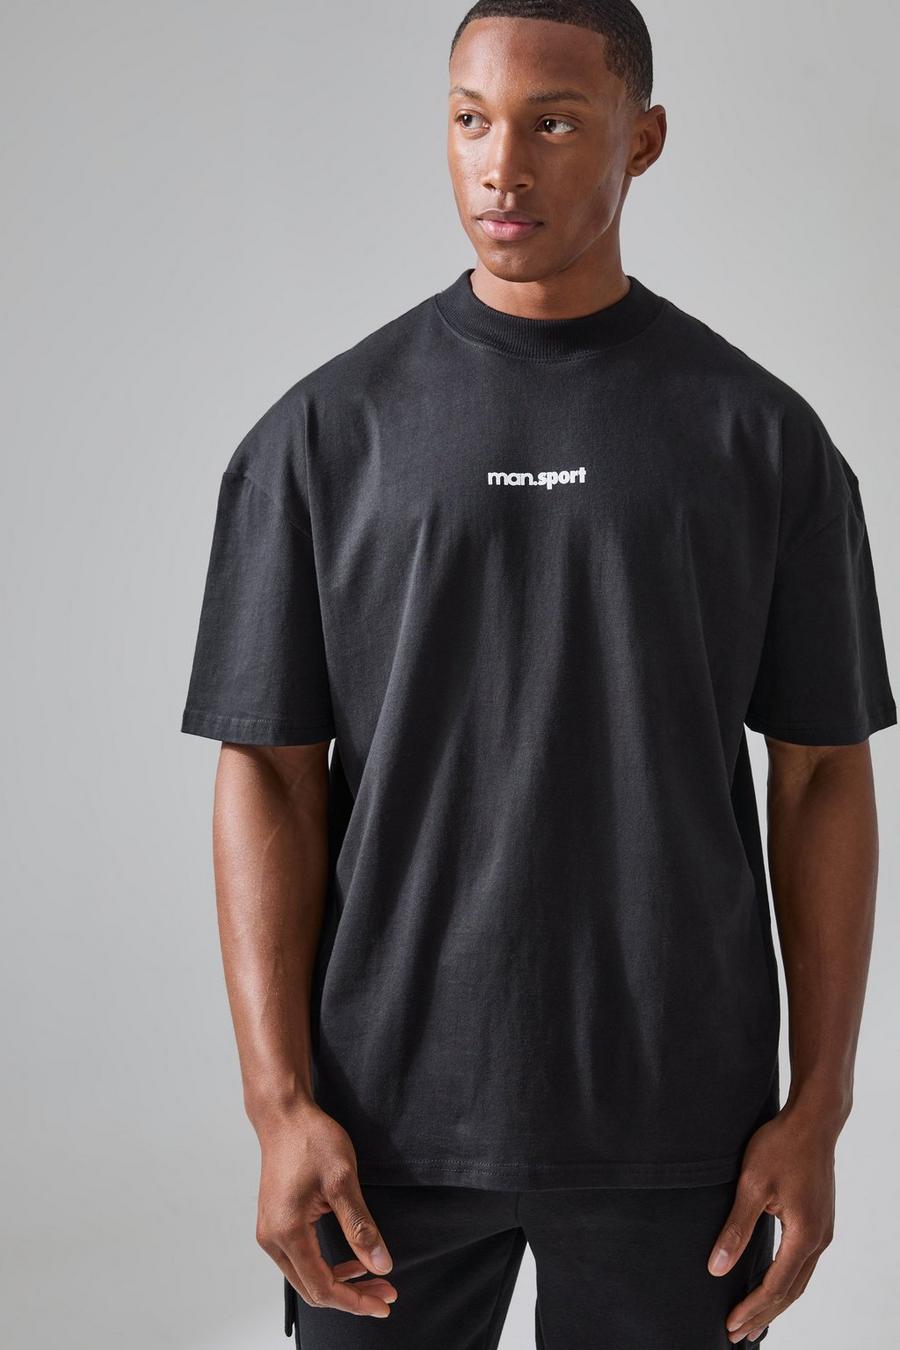 Man Active Oversized One More Rep Cut Off T-shirt, Black